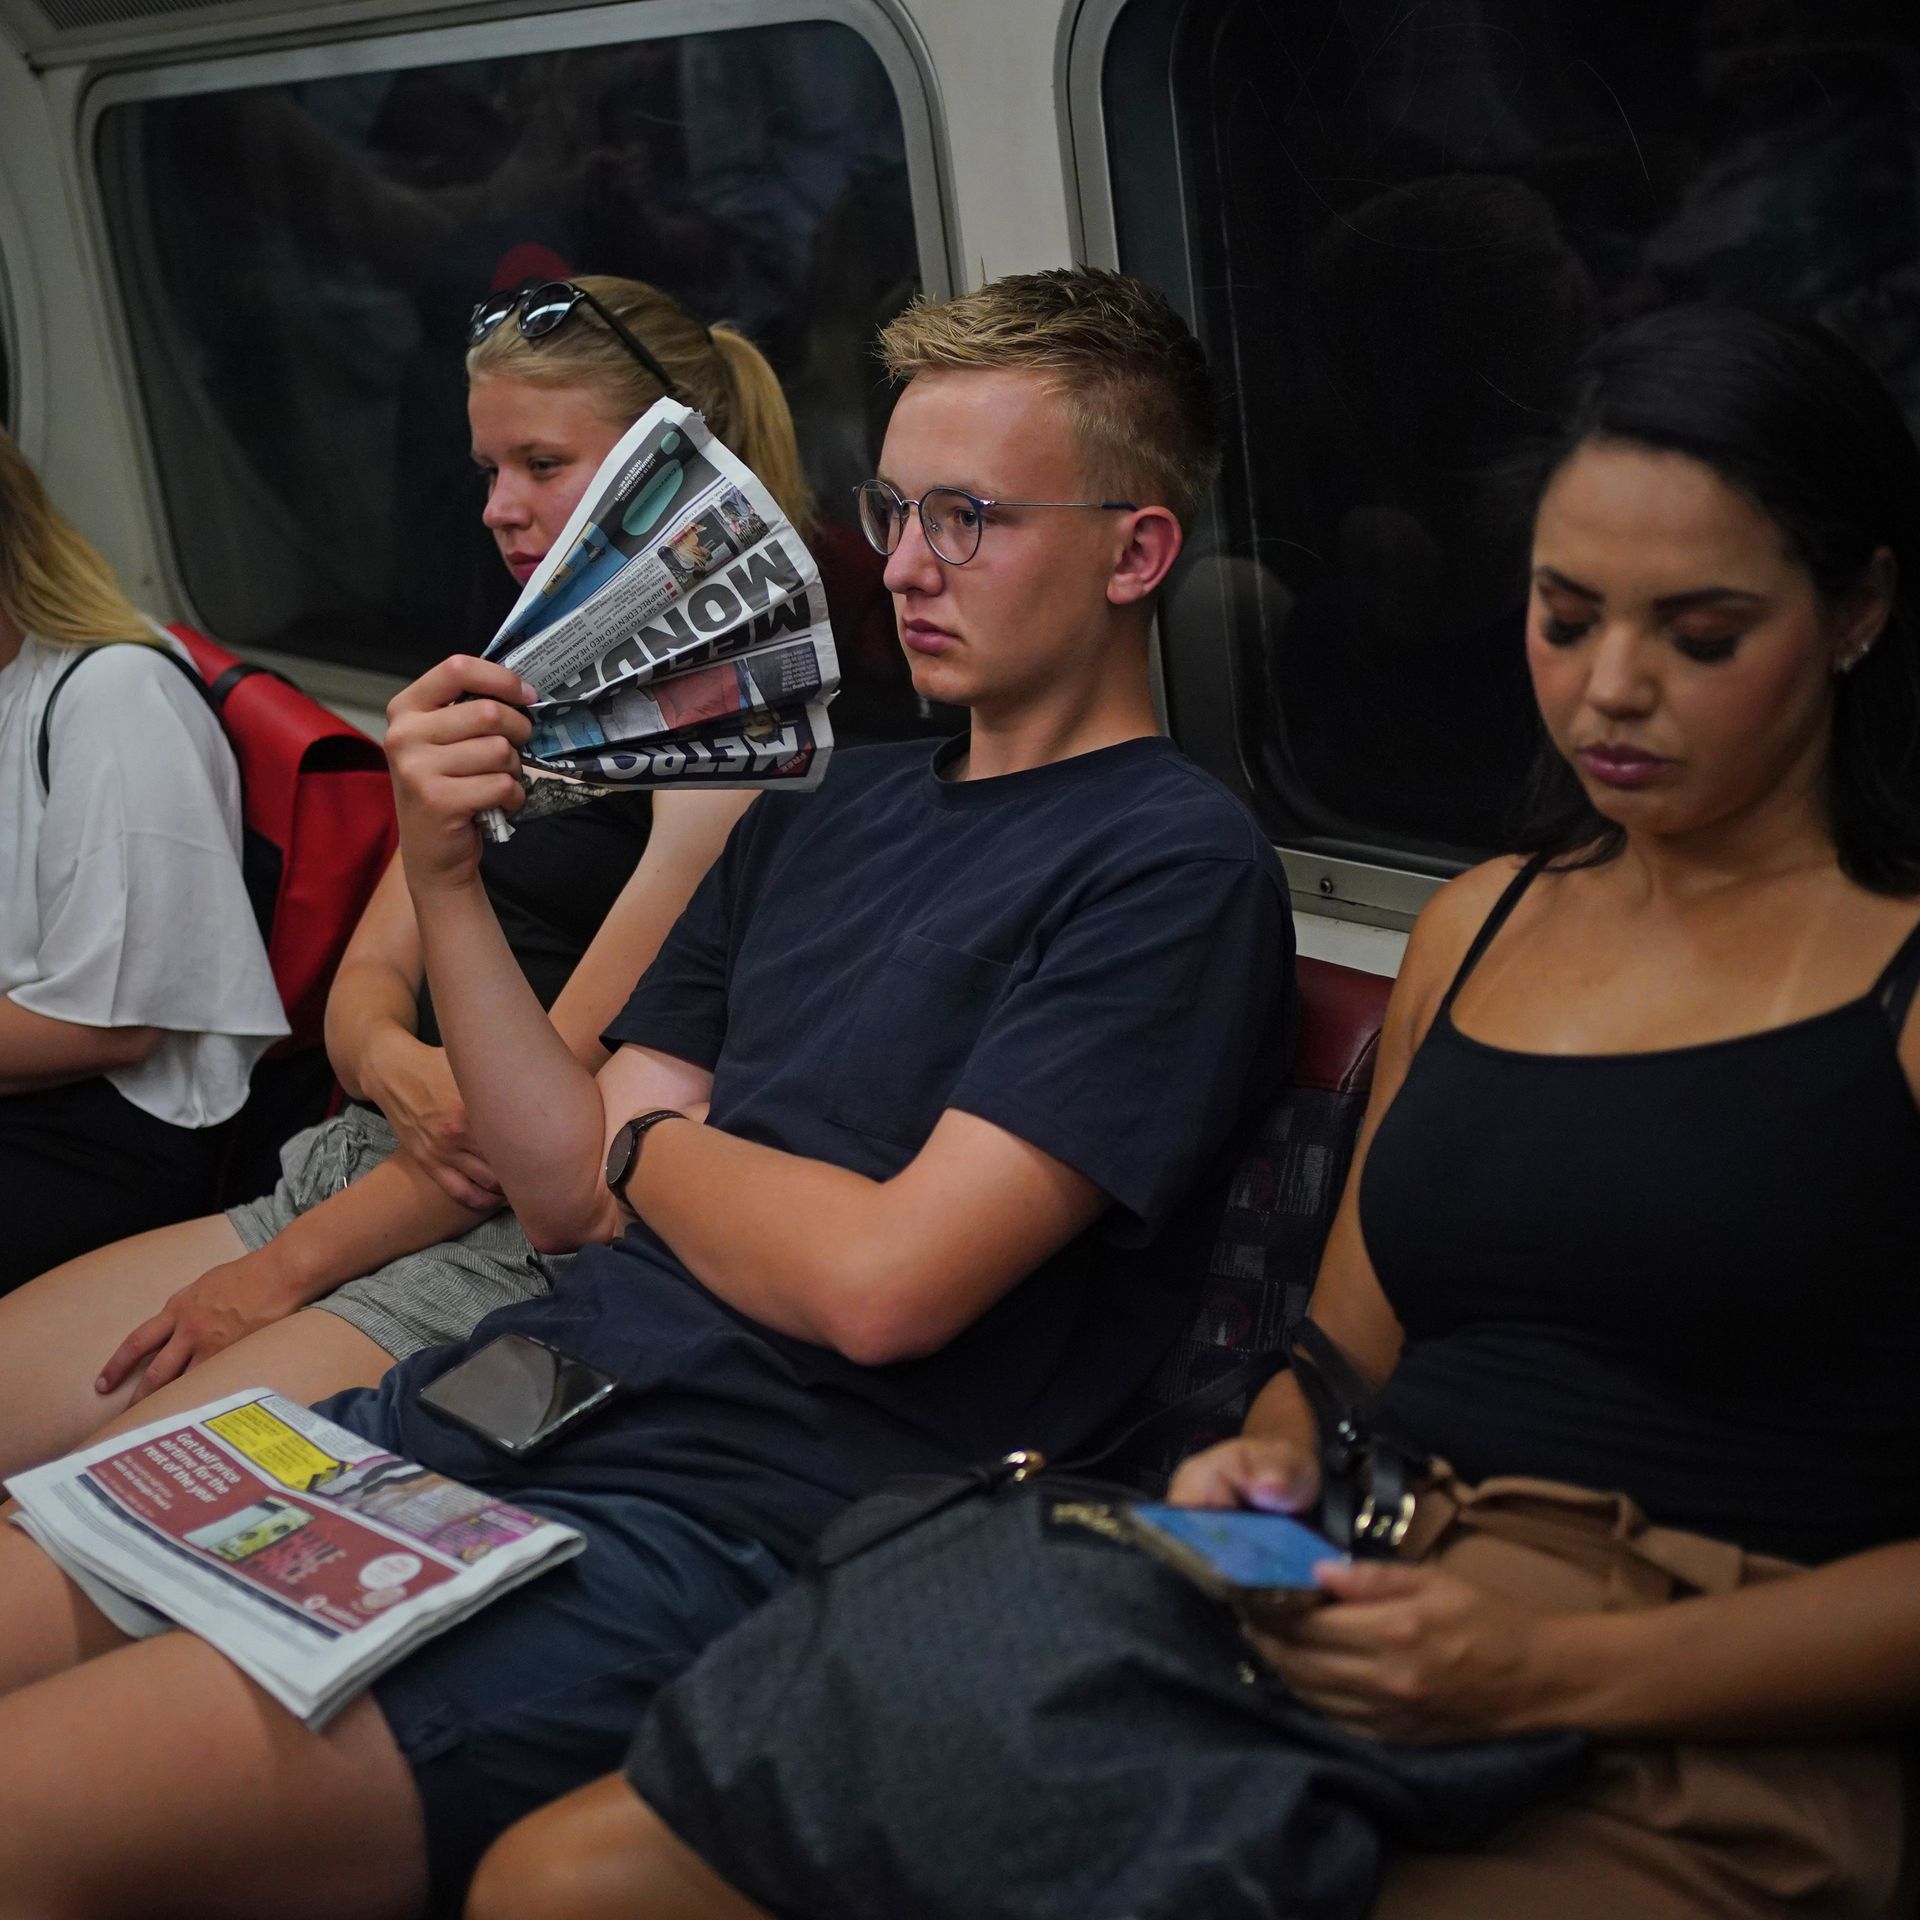 Man on London subway fans himself with newspaper during a heat wave.